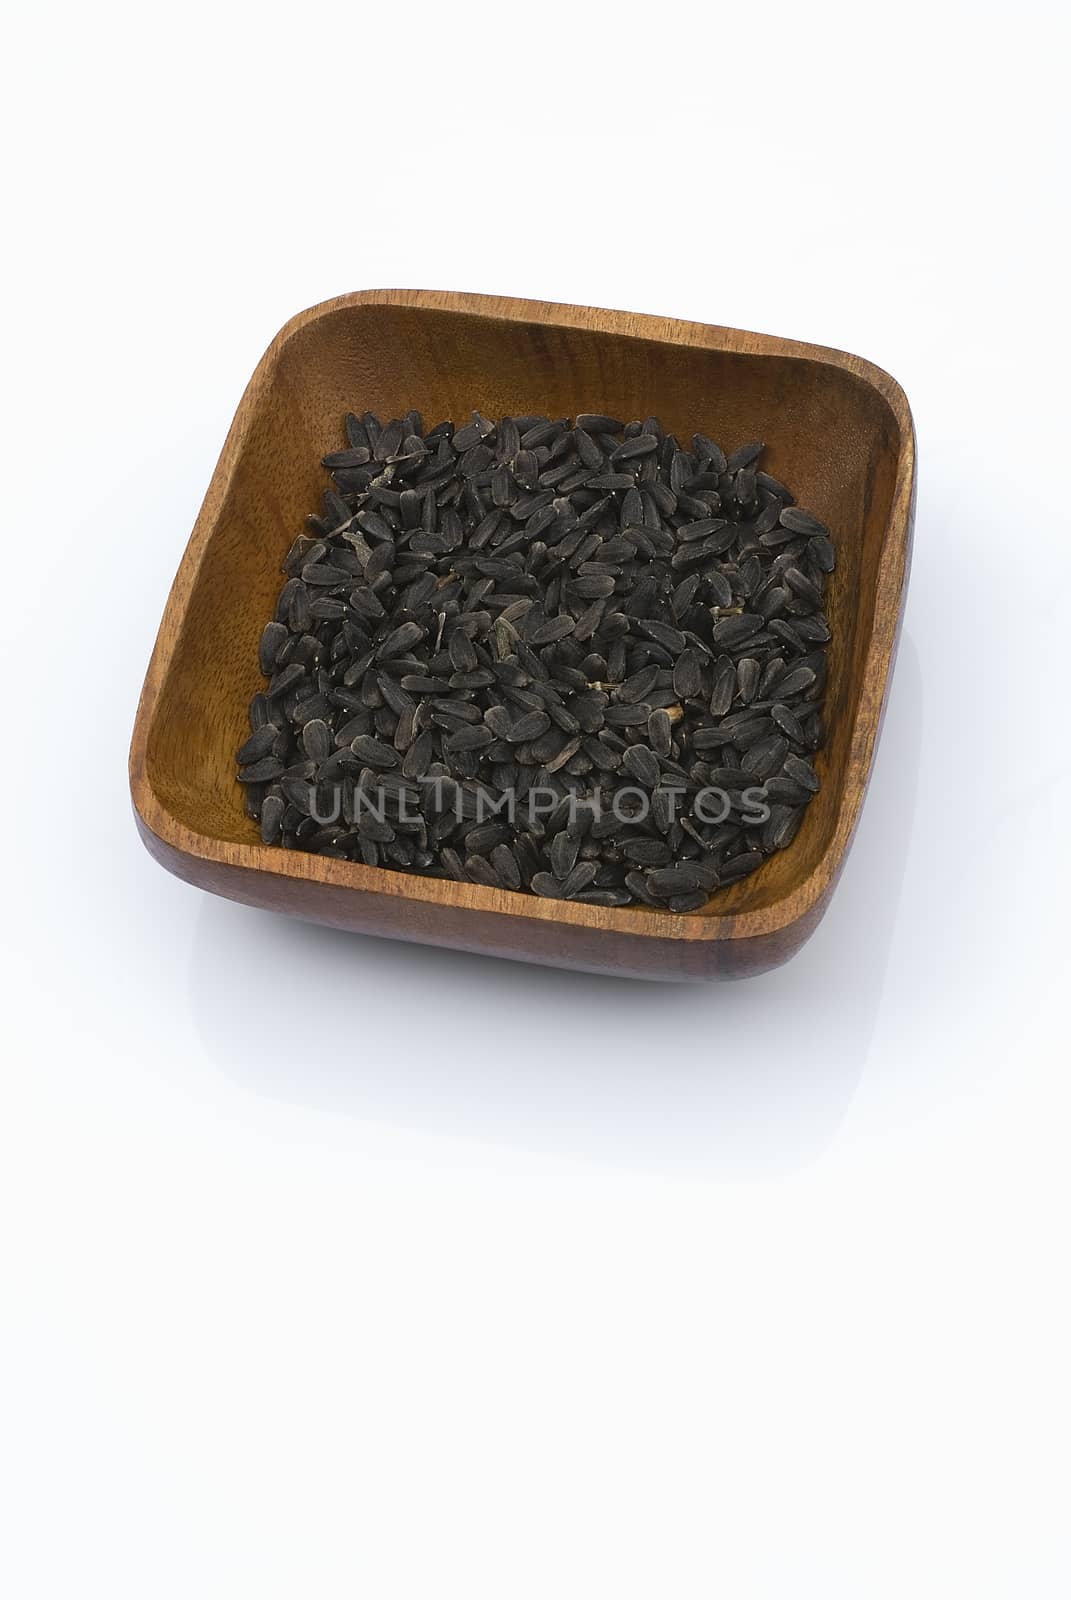 Sunflower seeds with wooden bowl isolated on white background.